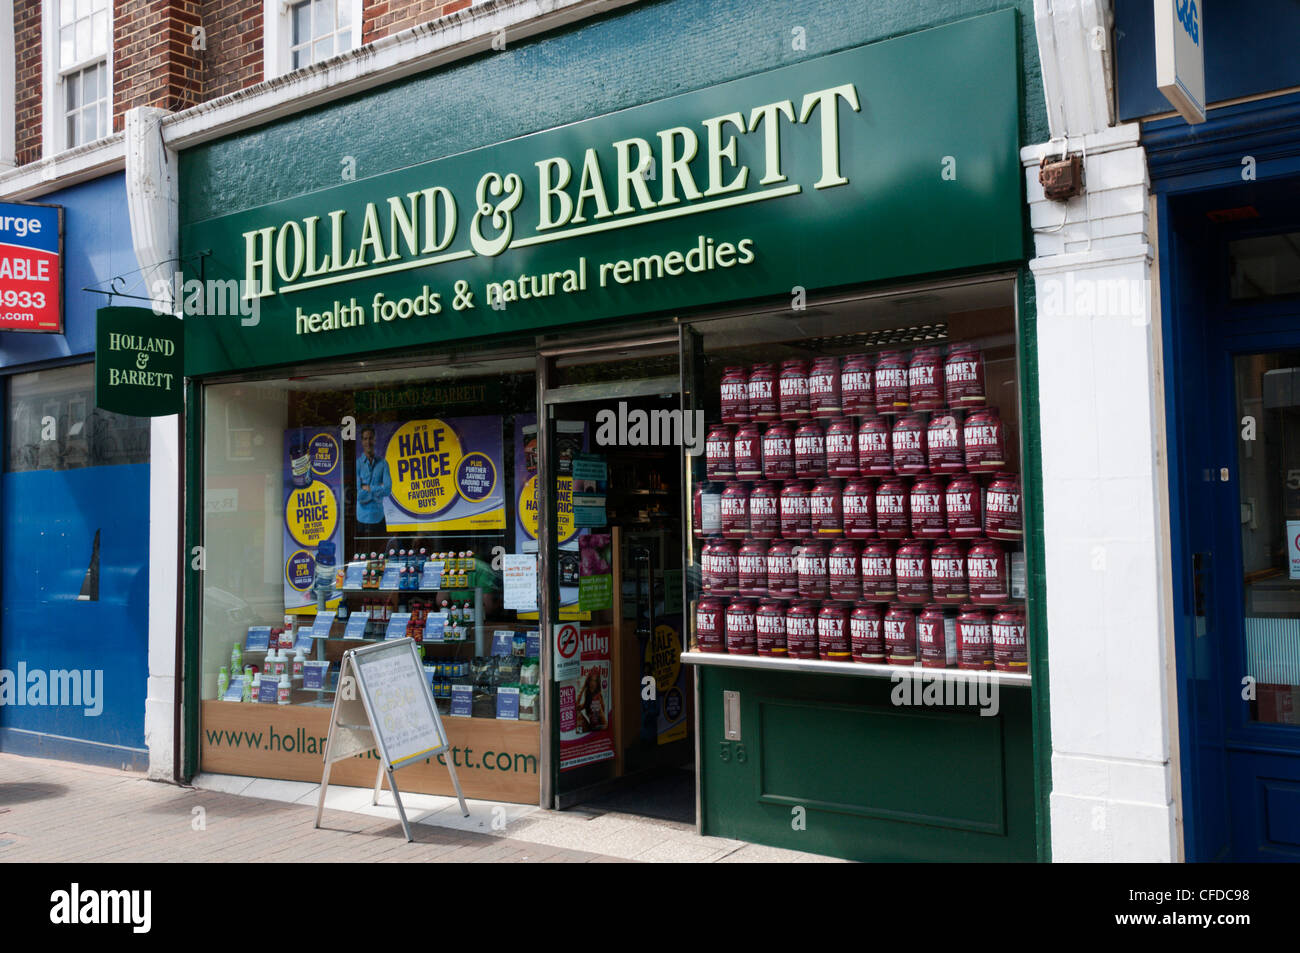 A Holland & Barrett health foods and natural remedies shop. Stock Photo